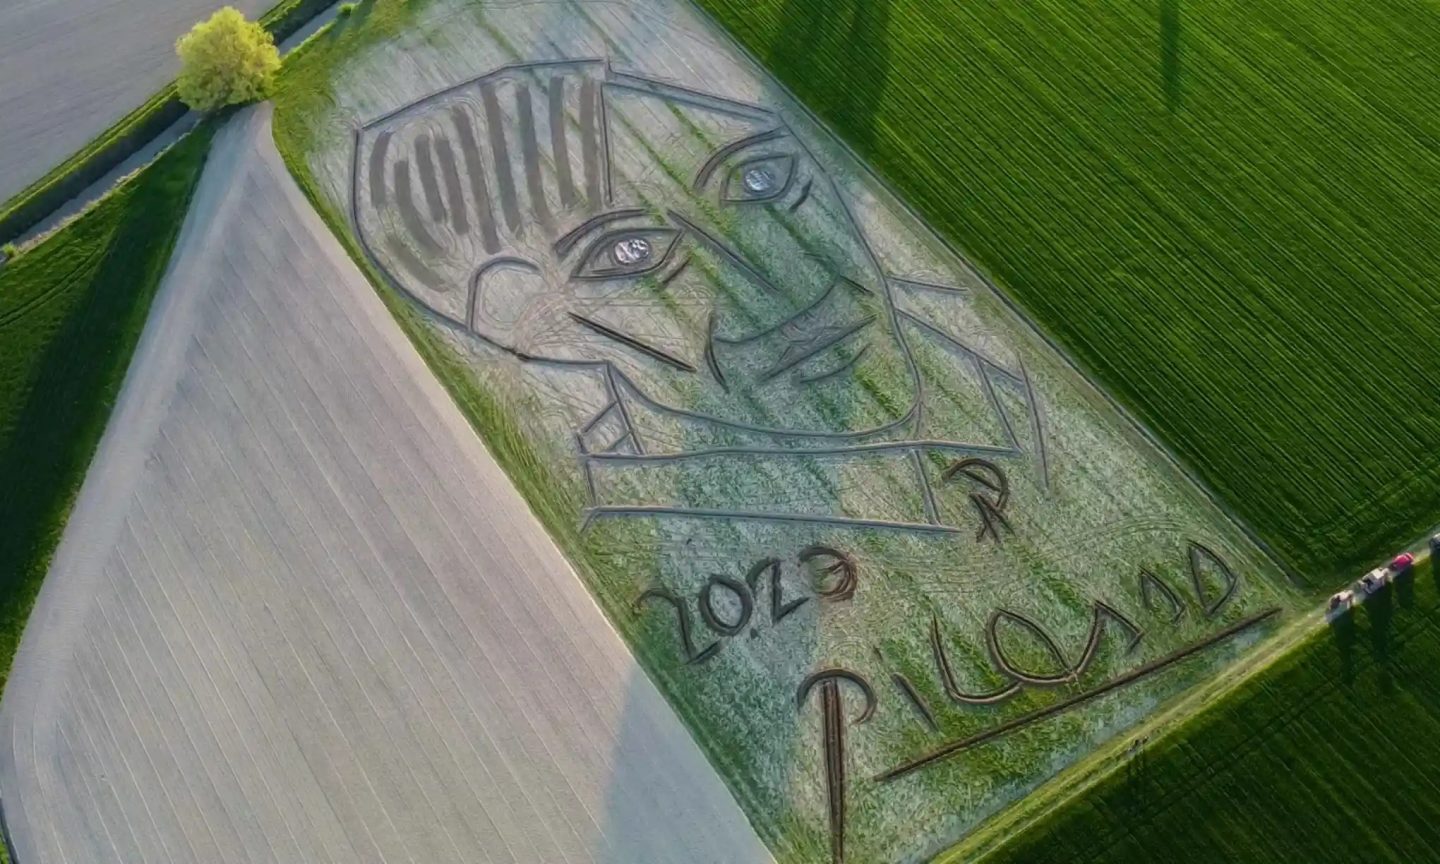 Italian land artist makes world’s largest Picasso portrait with tractor